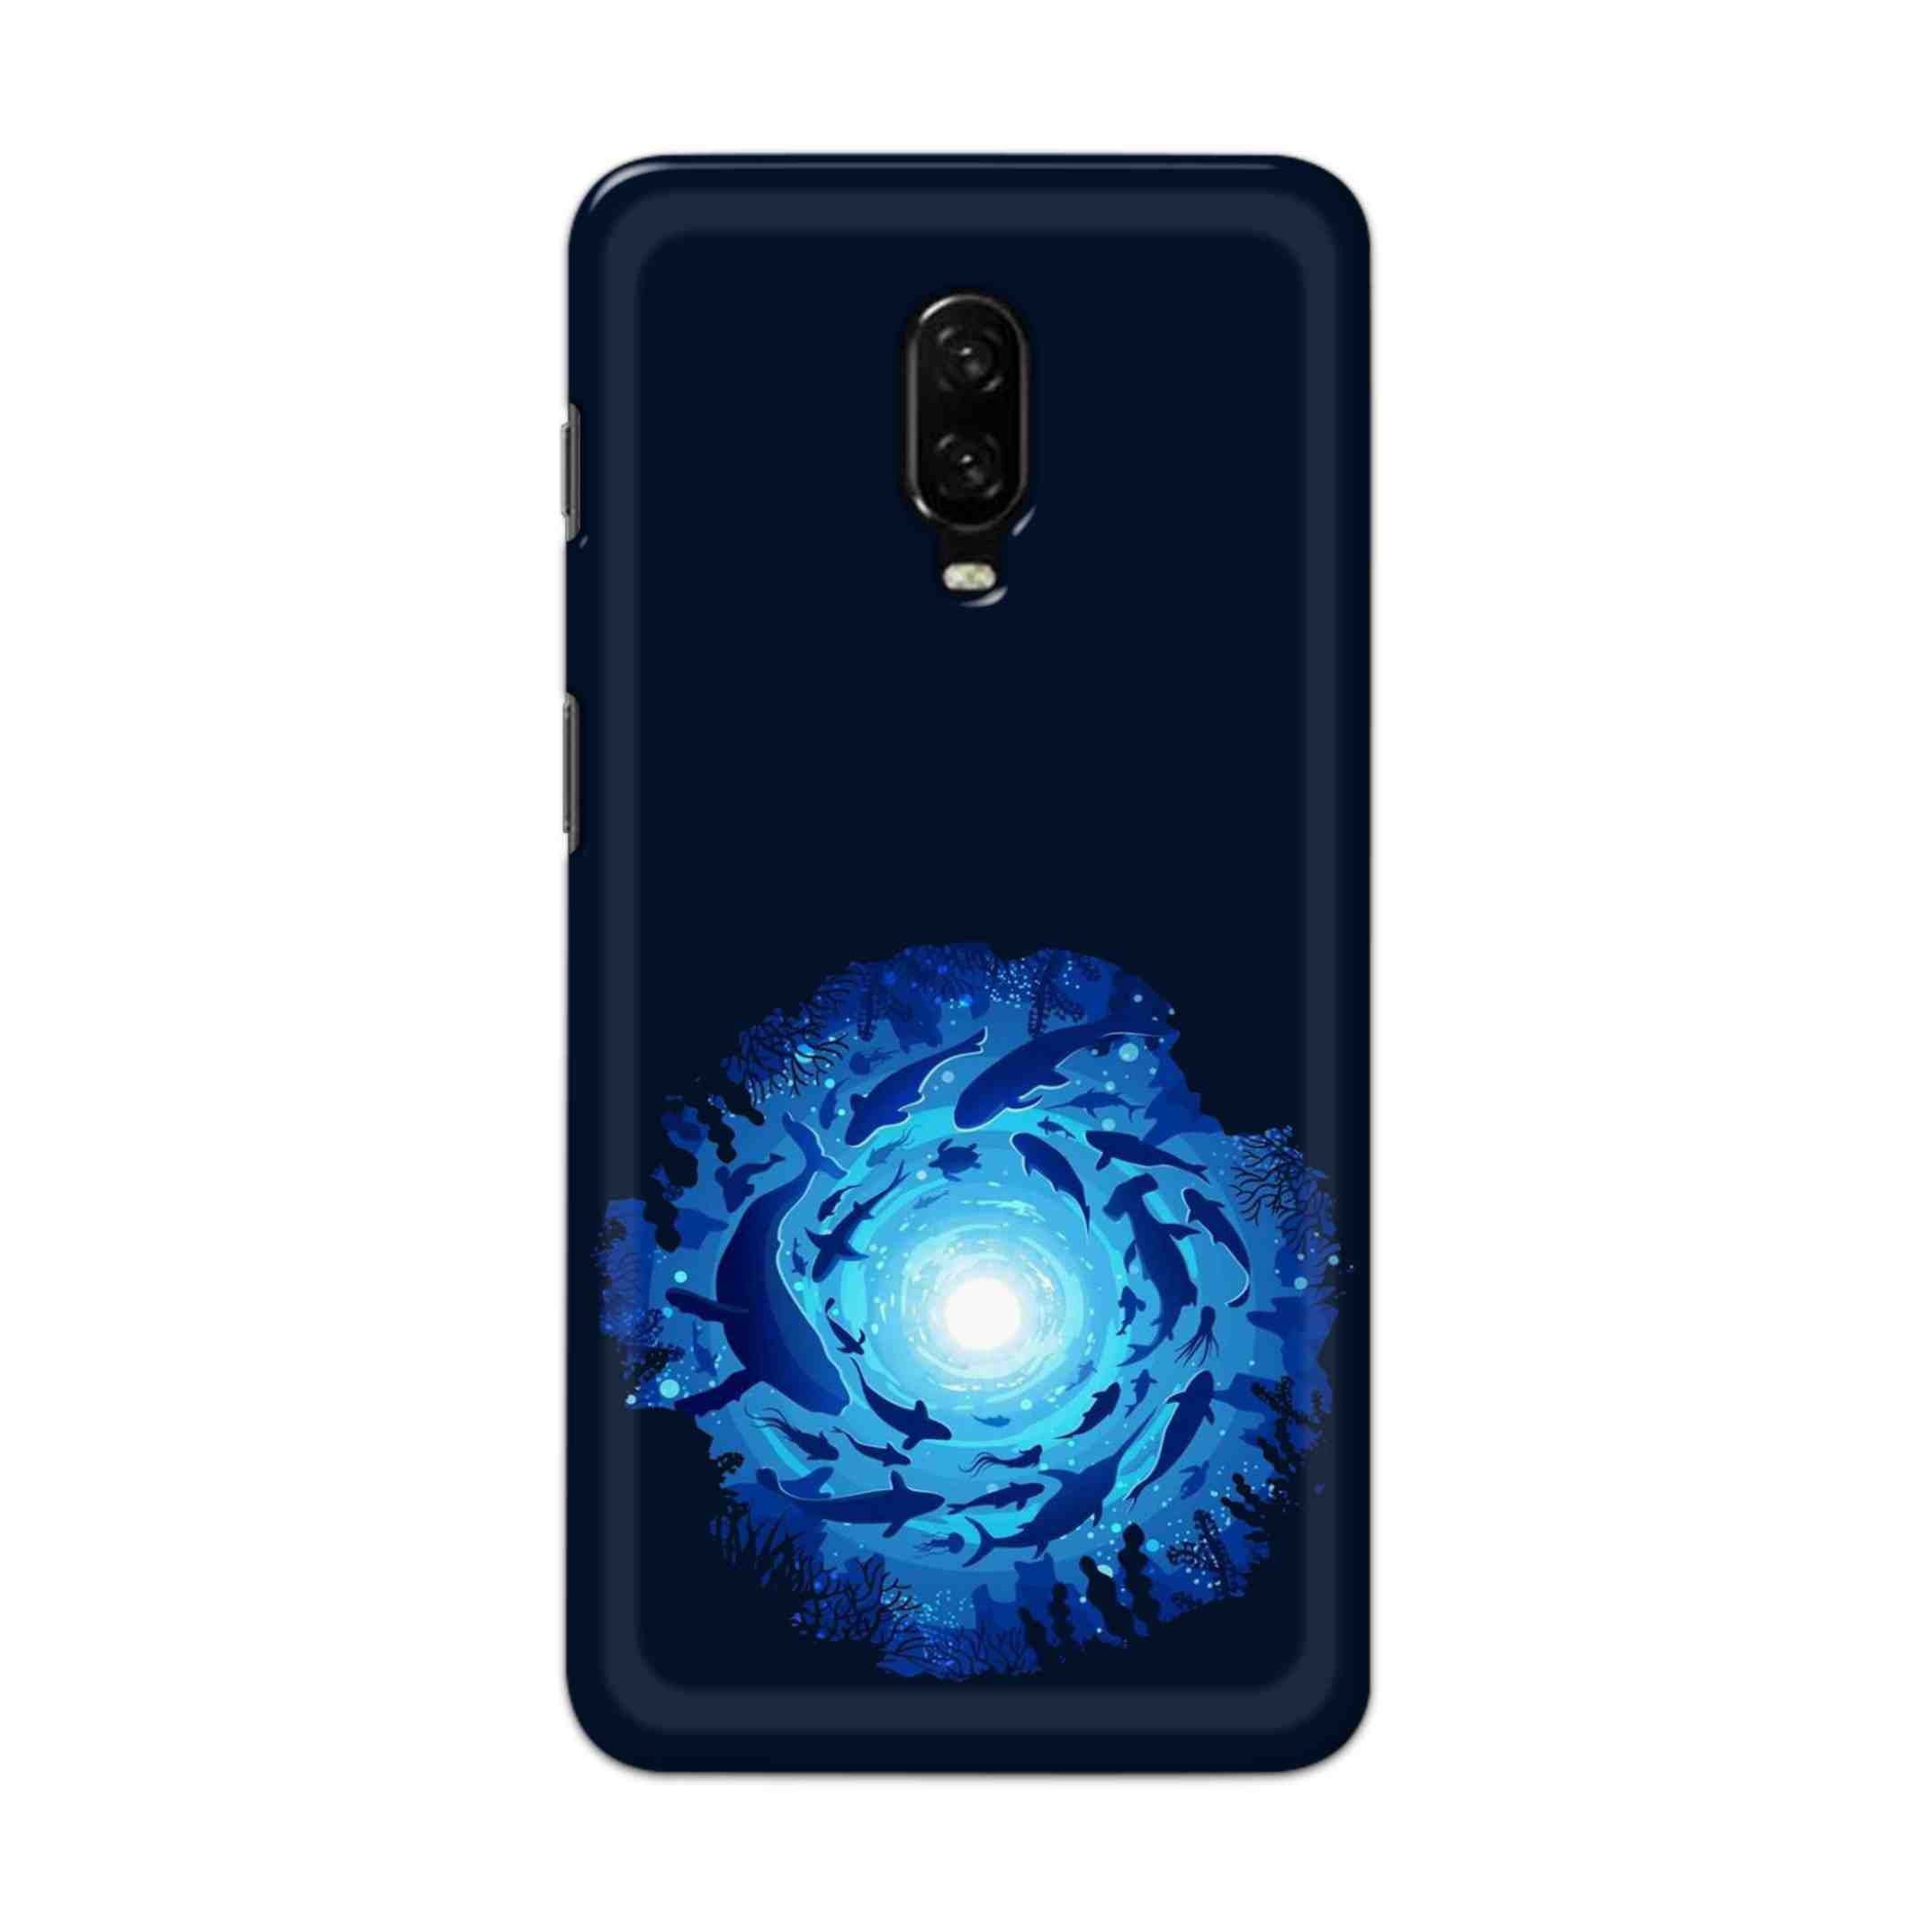 Buy Blue Whale Hard Back Mobile Phone Case Cover For OnePlus 6T Online